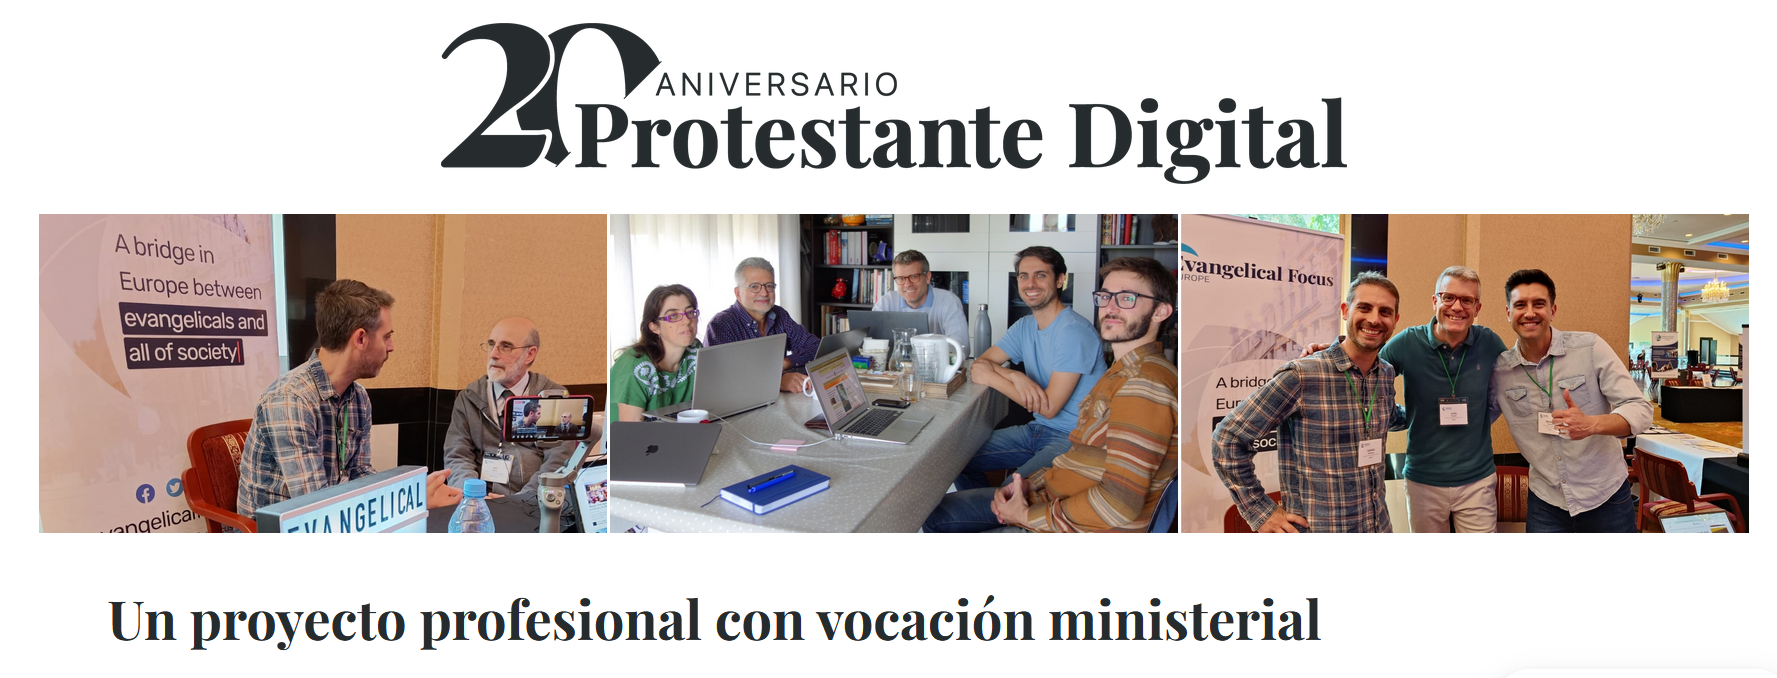 ‘Protestante Digital’, the Spanish media project that hopes to inspire other evangelicals in Europe